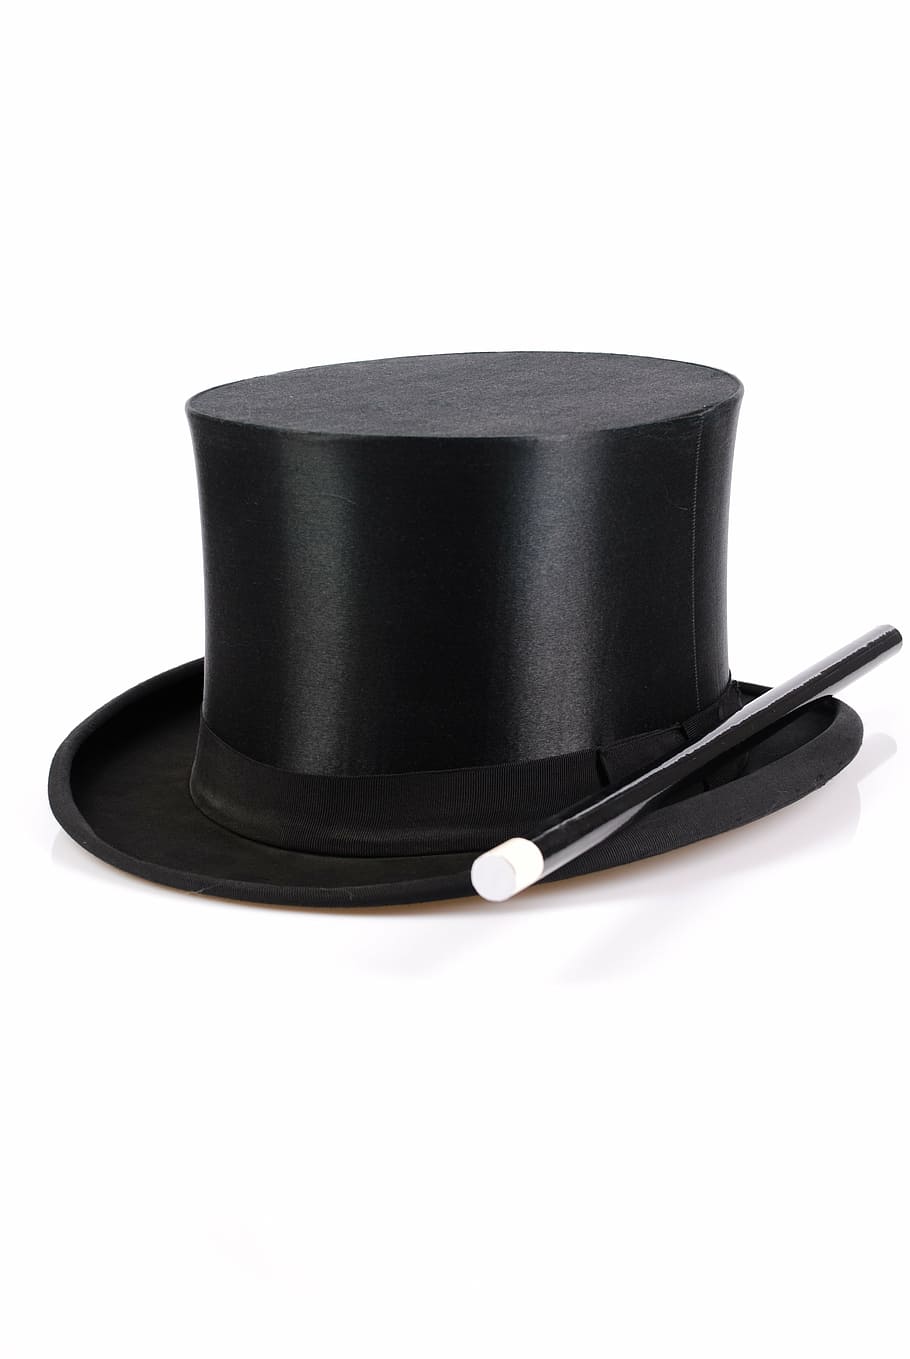 black top hat and magic wand, black magic, witchcraft, showing